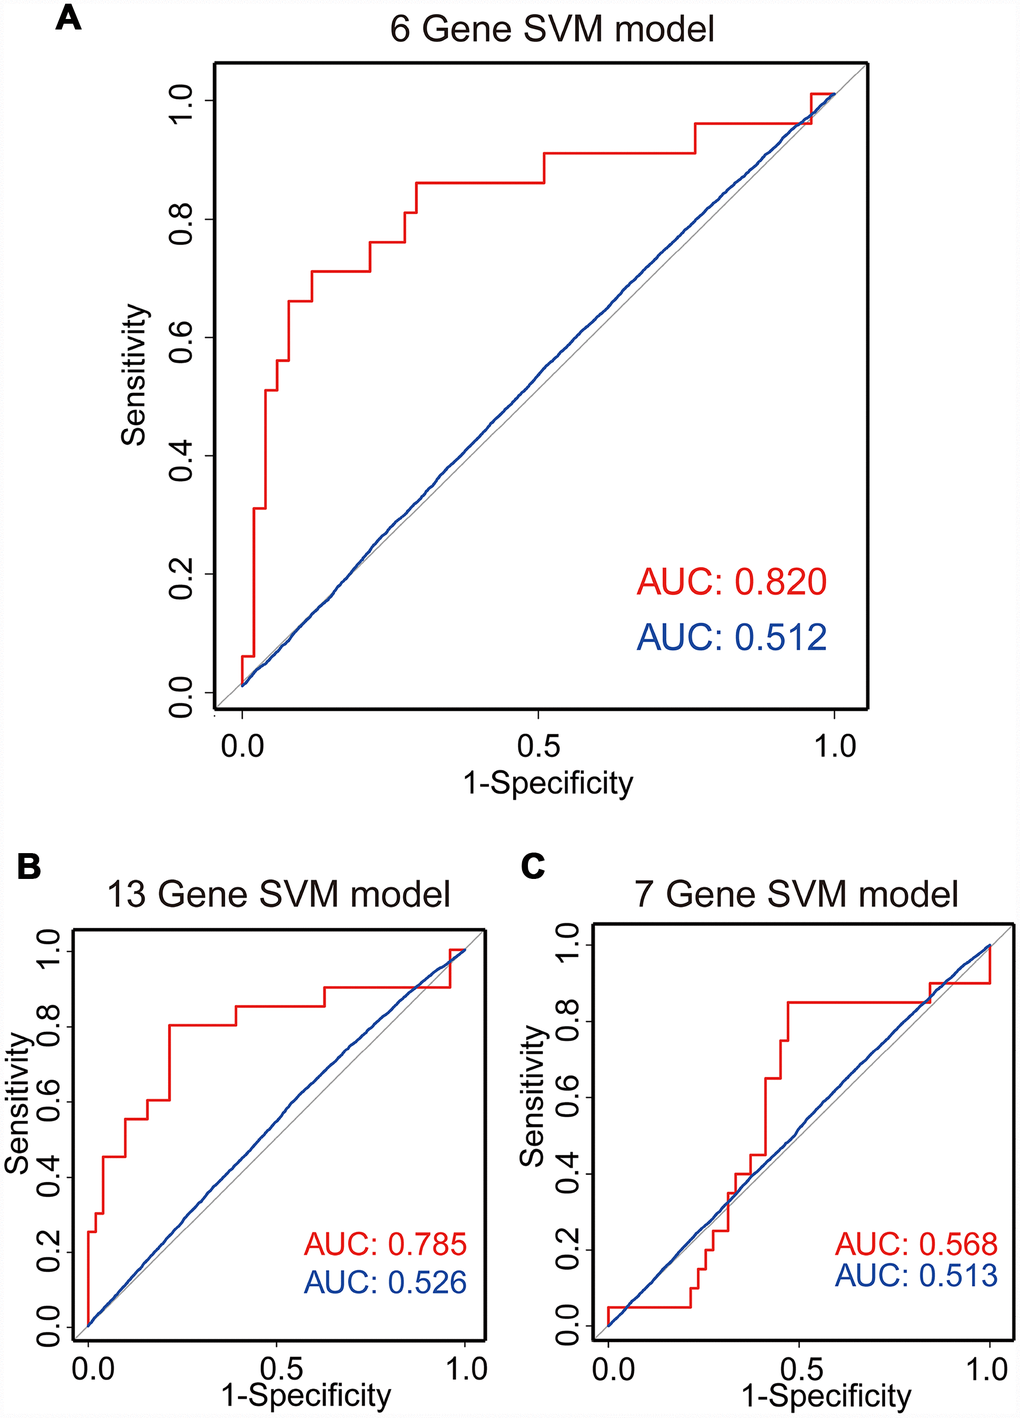 SVM regrowth prediction model. Three ROC curves using LOOCV show the comparisons of the AUC for the prediction of regrowth with 6 genes (A), 13 genes (B) and 7 genes (C). The red line shows the prediction model efficiency, and the blue line shows the permutation p-value of AUC was obtained from 1,000 randomization tests for testing the null hypothesis. The 6-gene model shows a better prediction accuracy.